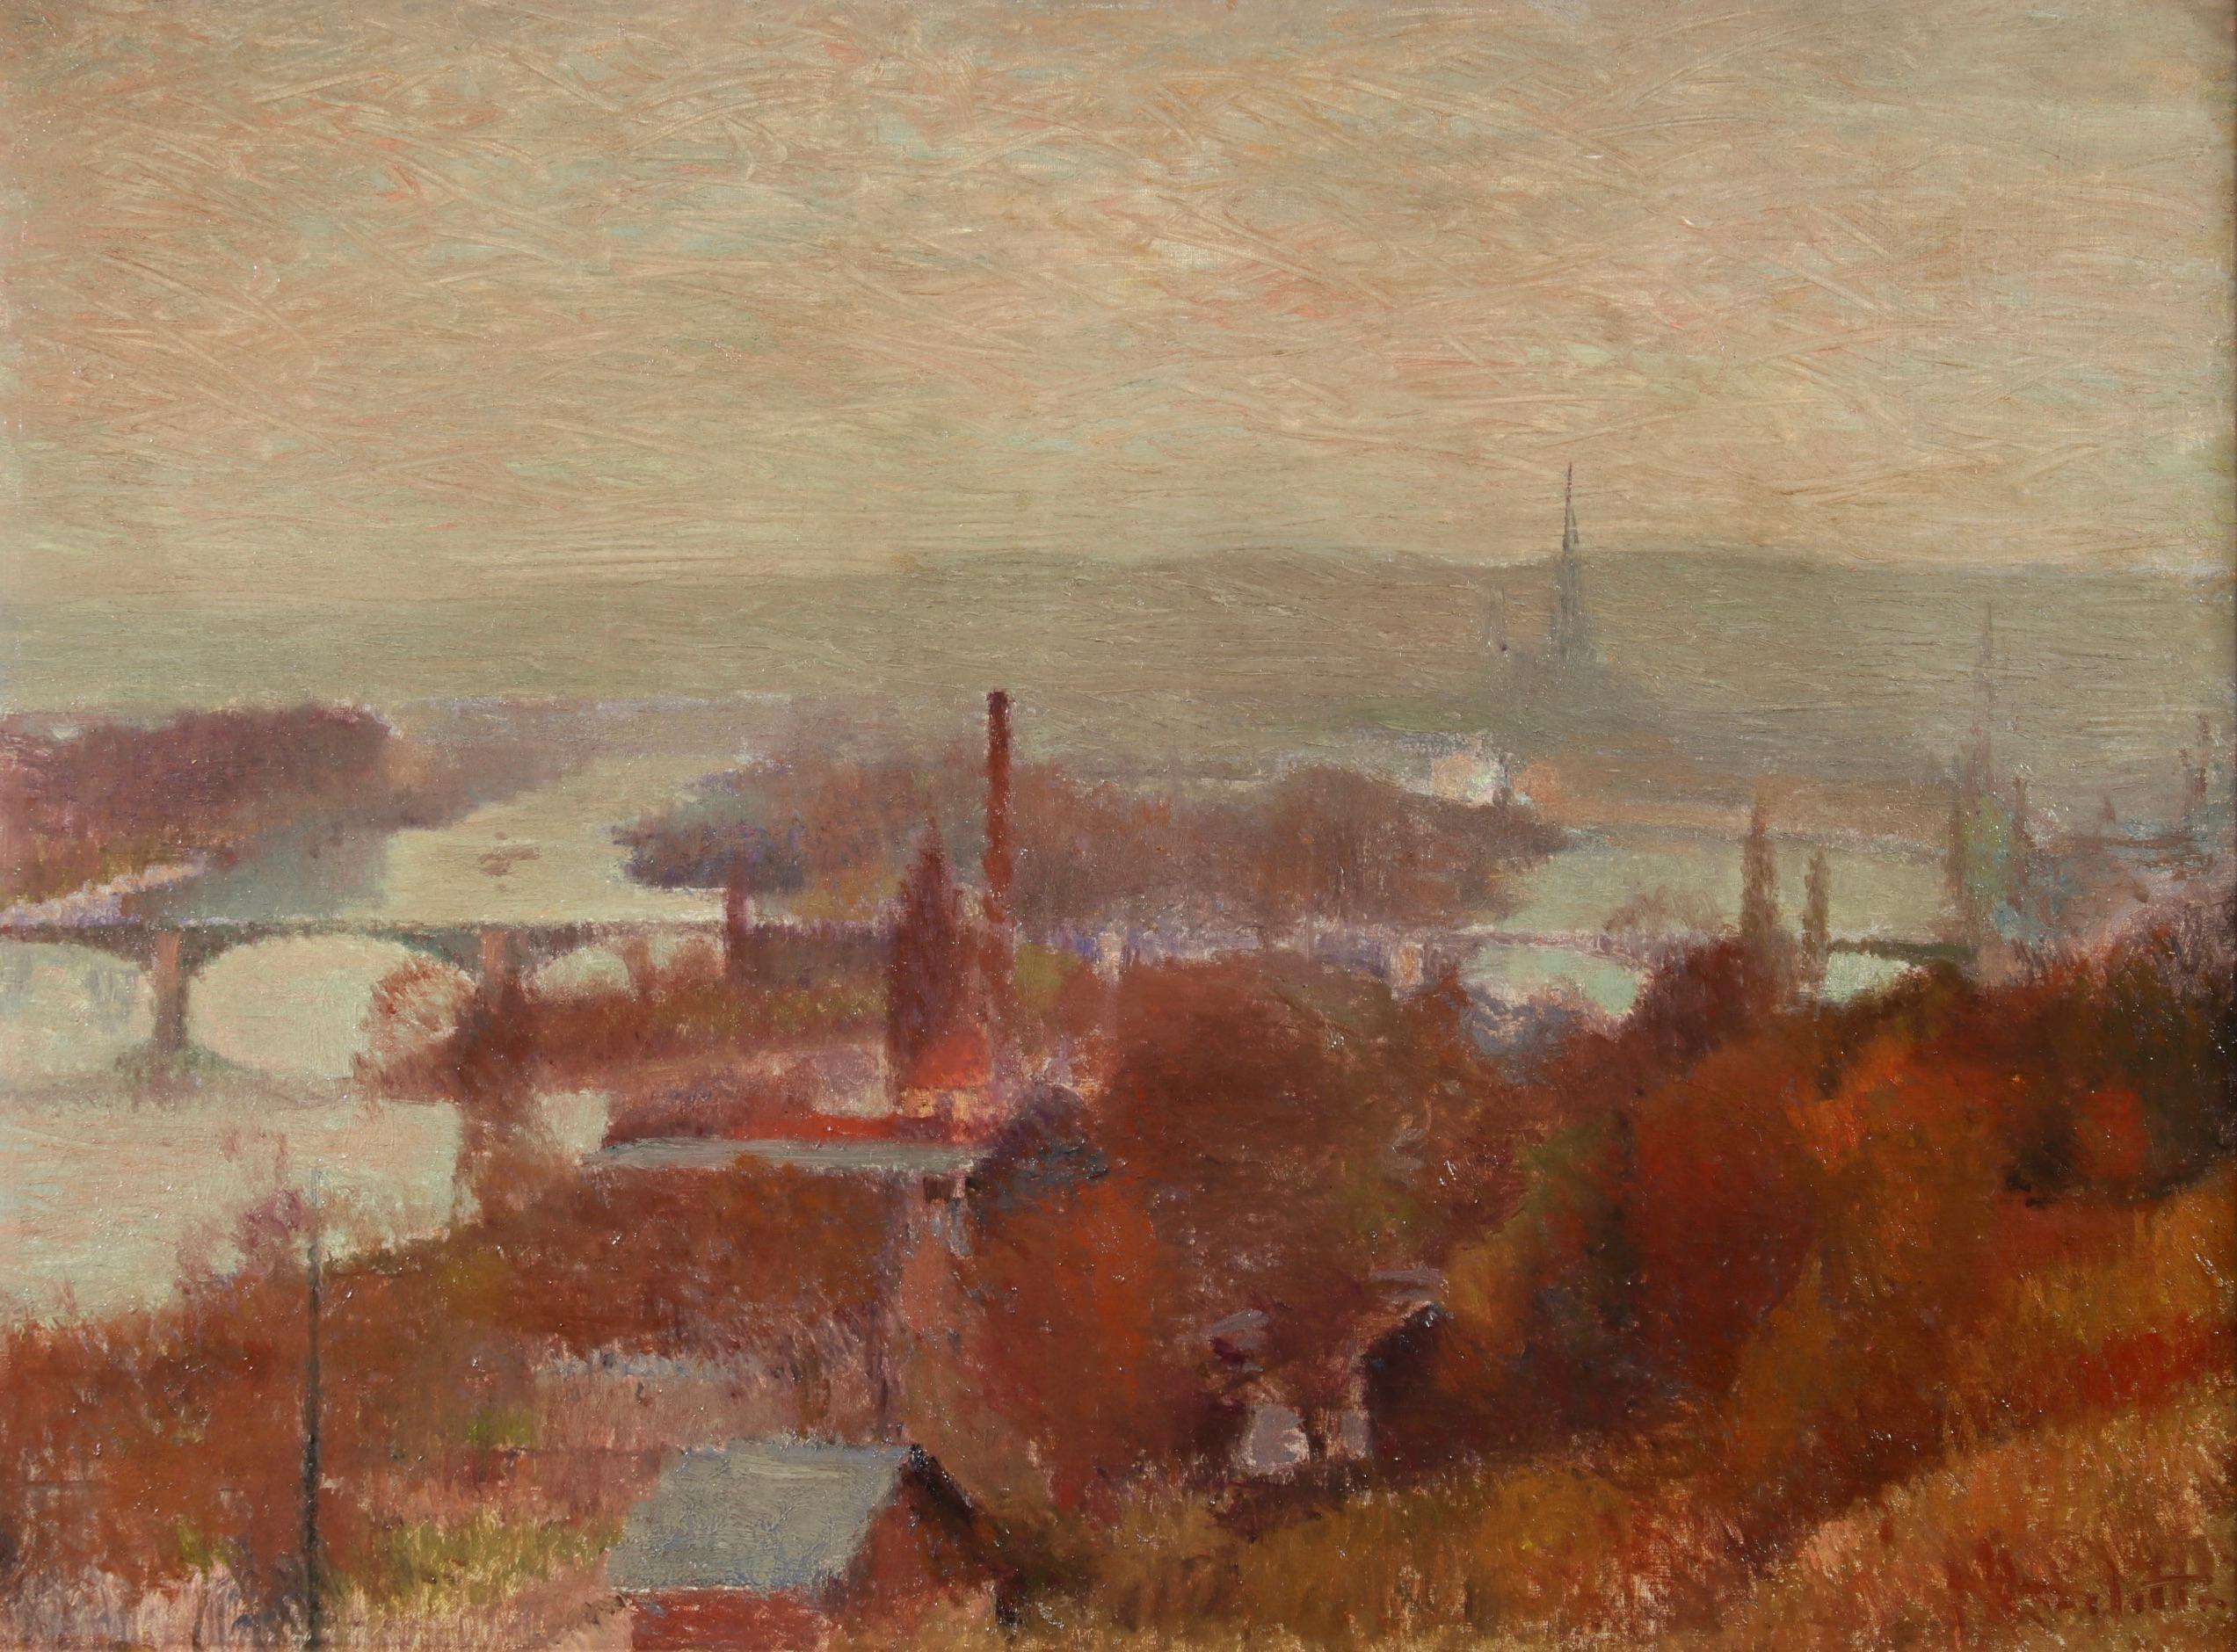 A beautifully brushed oil on canvas circa 1895 by French Impressionist painter Joseph Delattre. The piece depicts of a view of a bridge over the River Seine in Rouen, France with autumnal trees in oranges and reds in the foreground and the Spire of